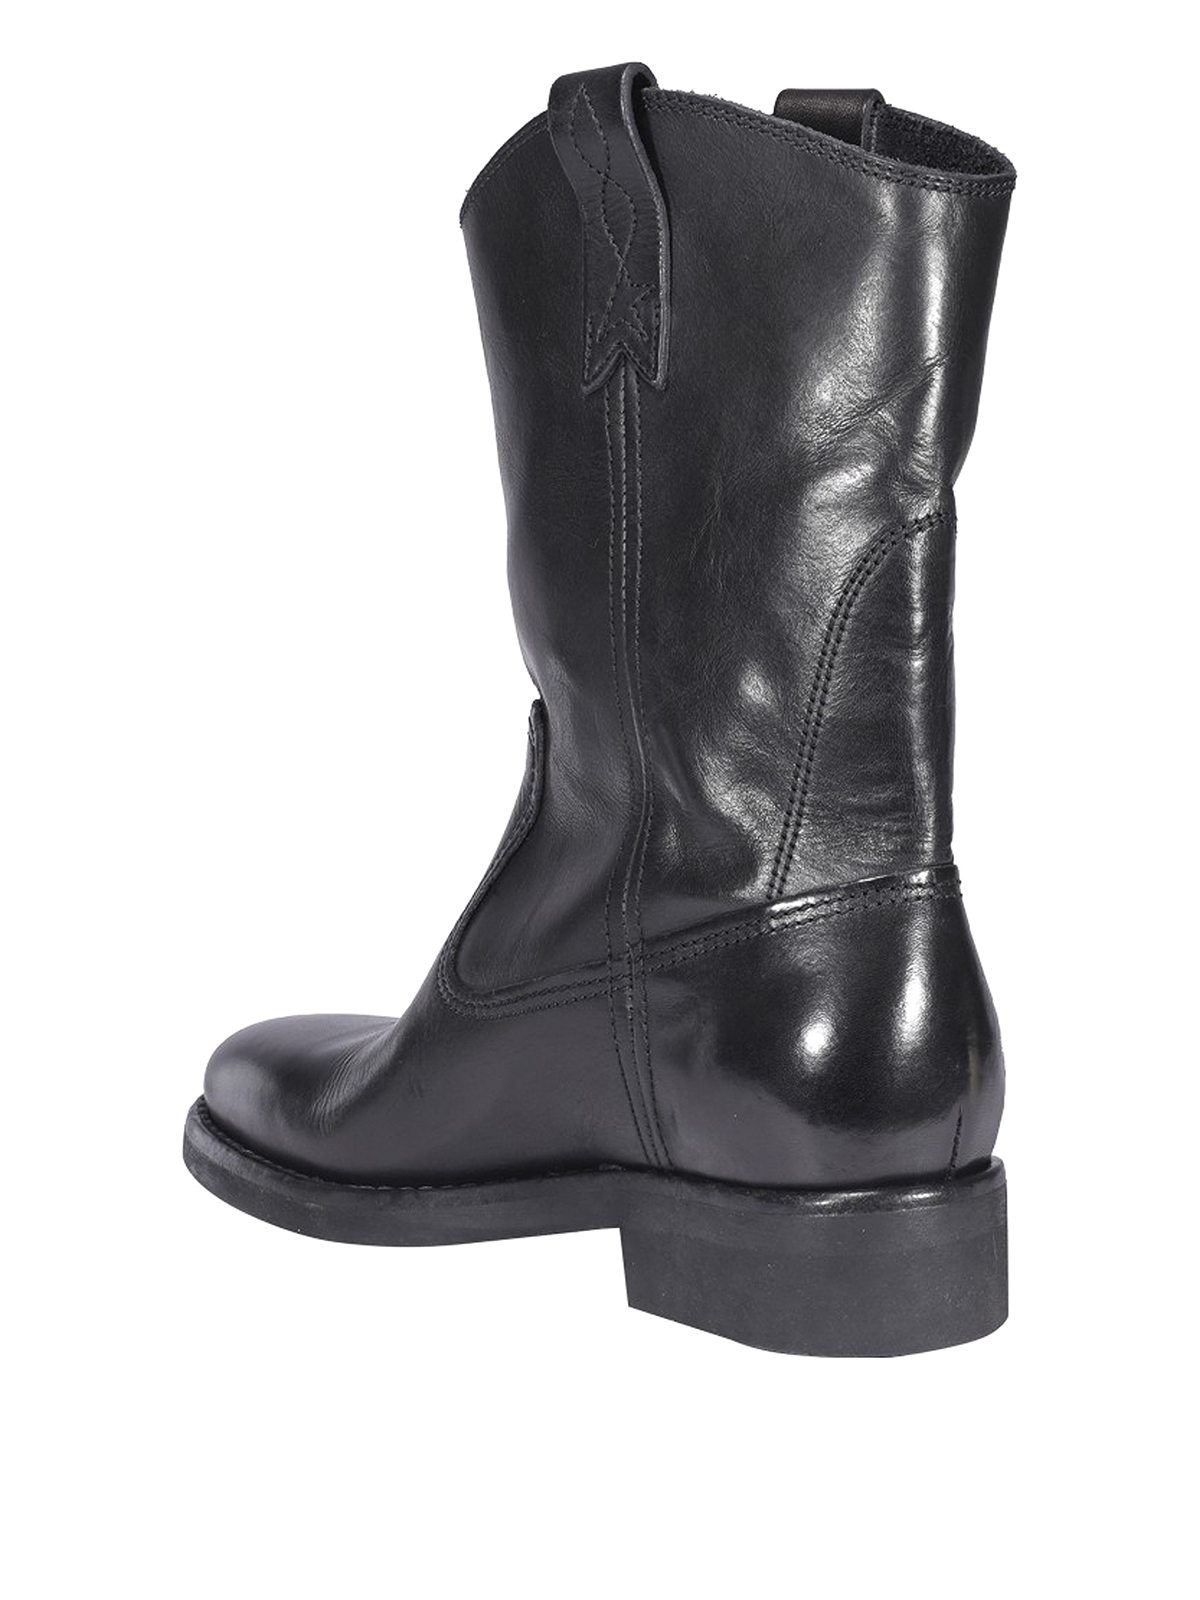 Boots Goose - Smooth leather biker